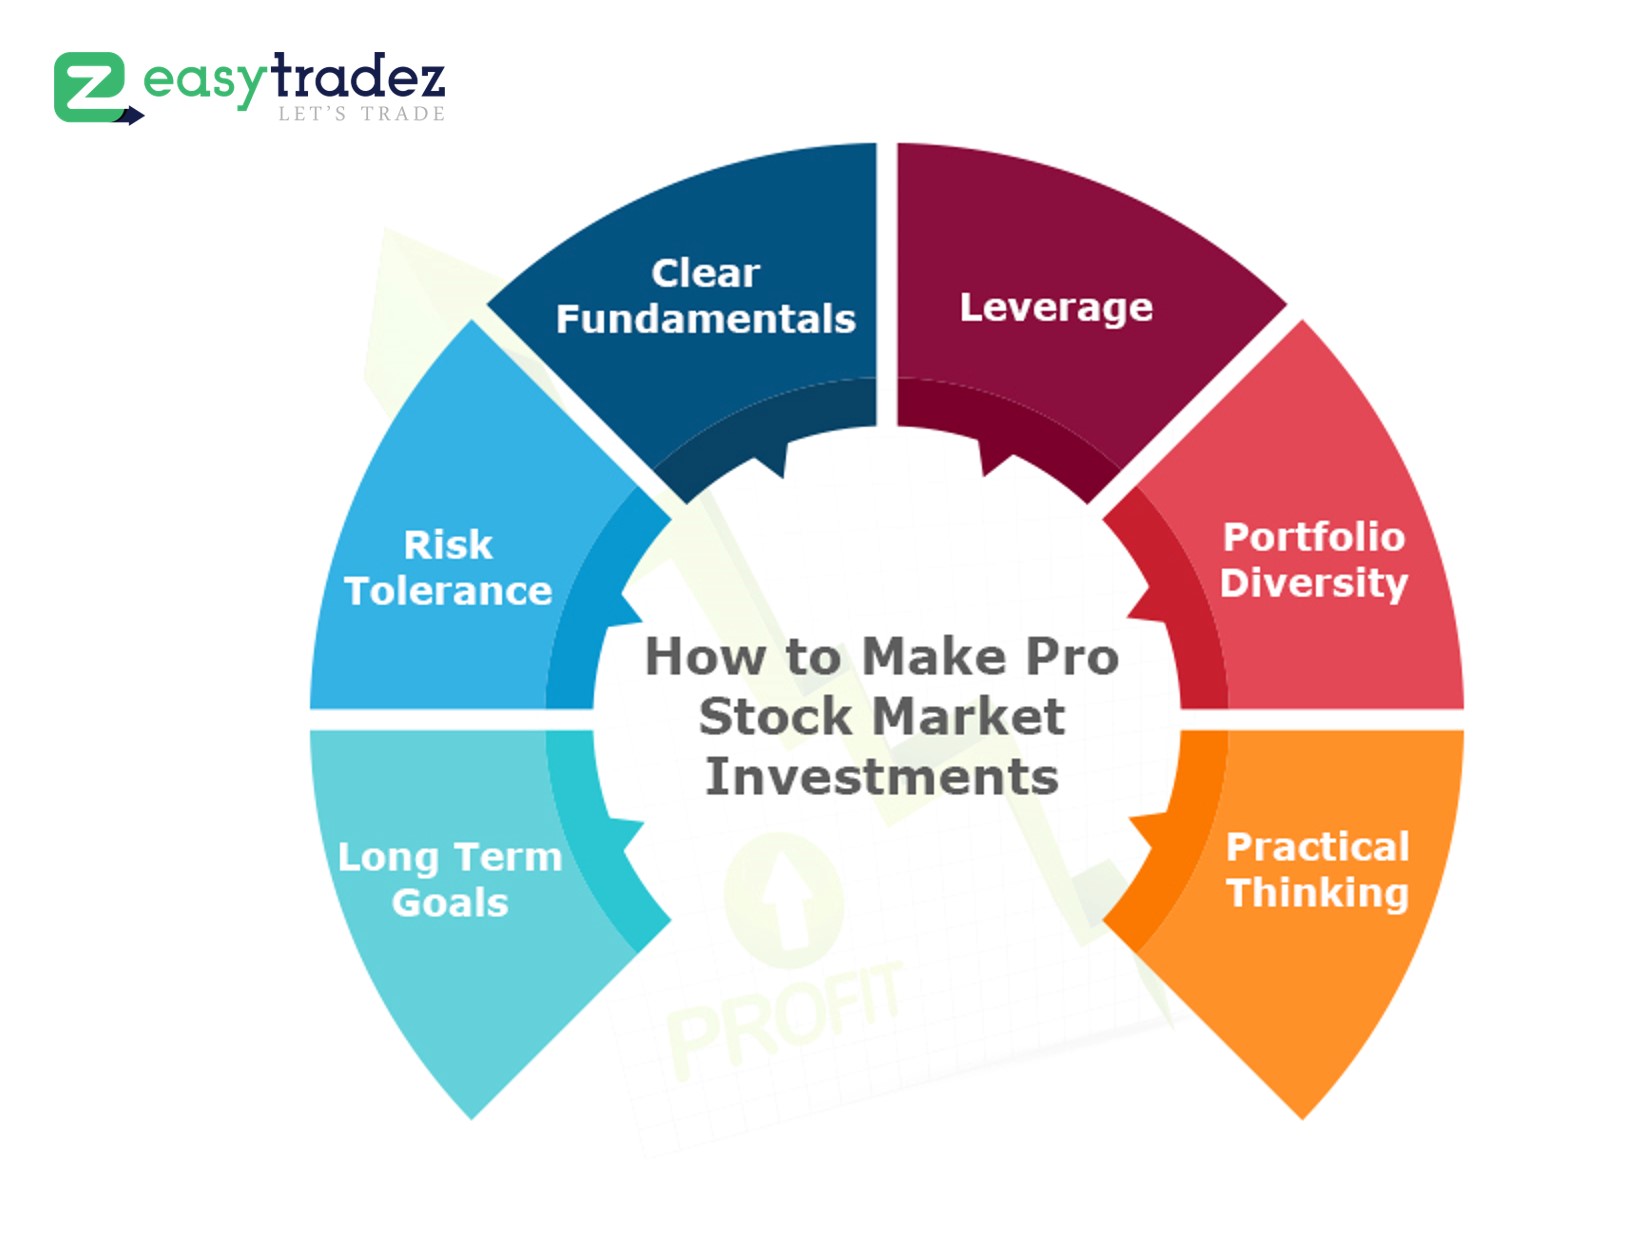 How to Make Pro Stock Market Investments